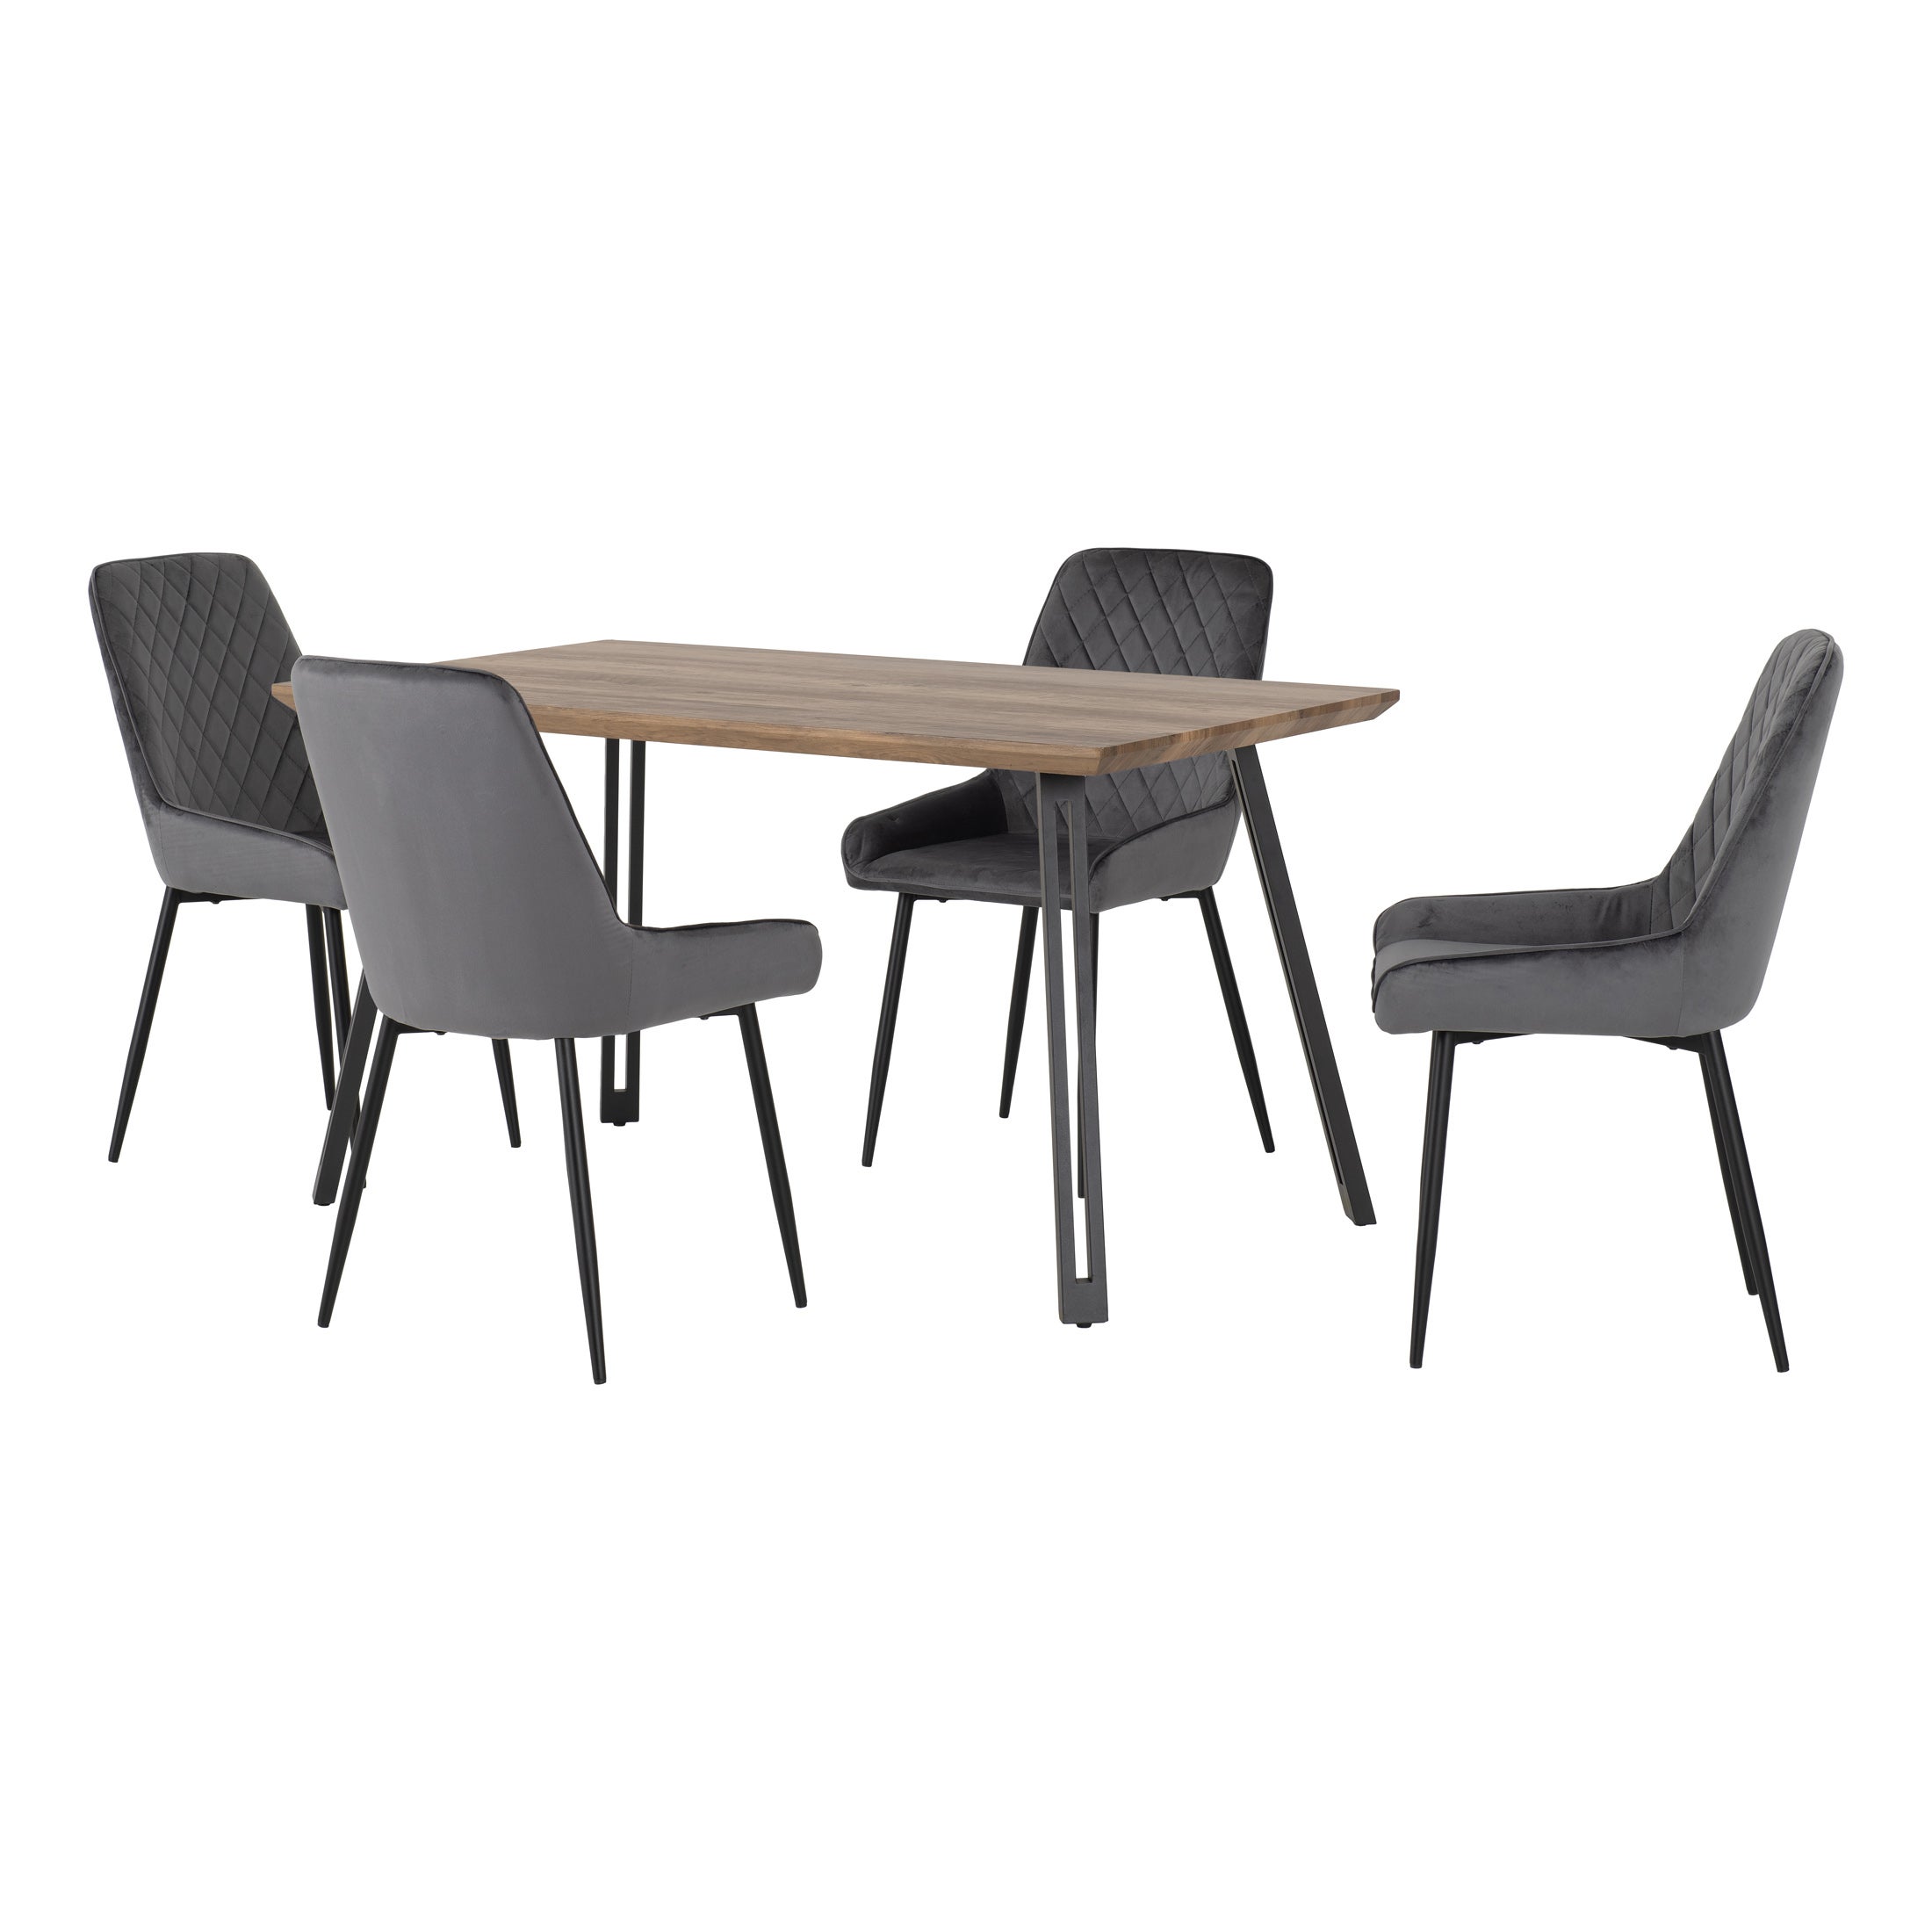 Quebec Rectangular Dining Table With 4 Avery Chairs Grey